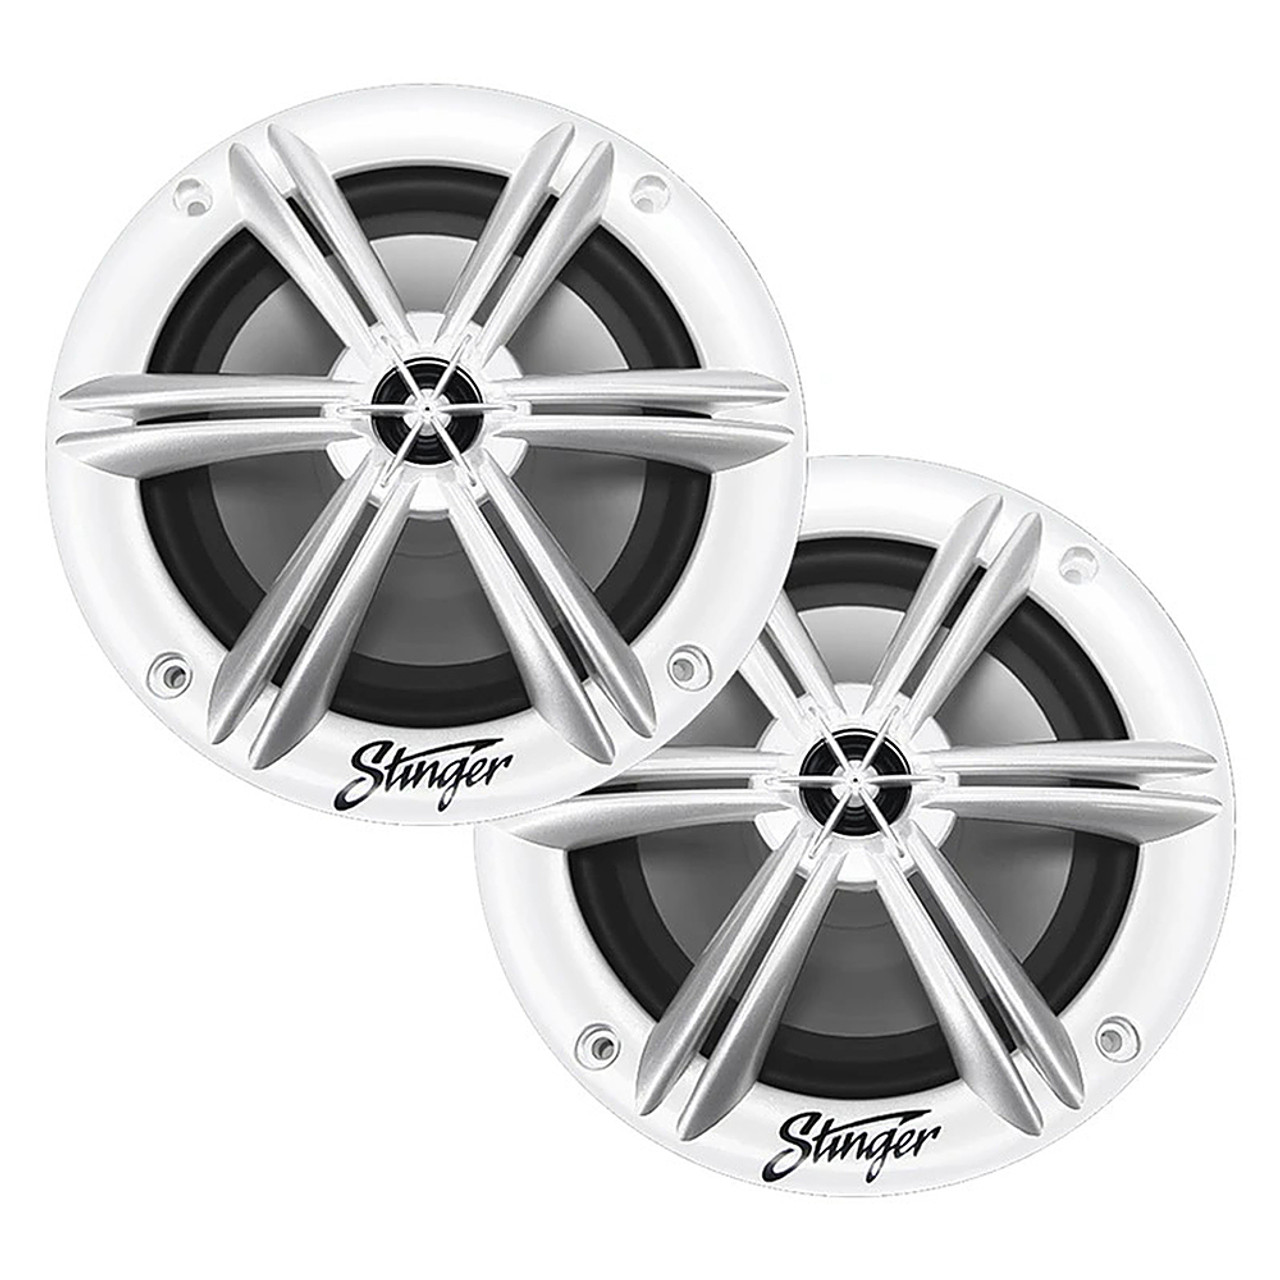 Stinger - 6.5” 2-Way Marine Coaxial RGB Speakers with Poly Carbon Cones (Pair) - White